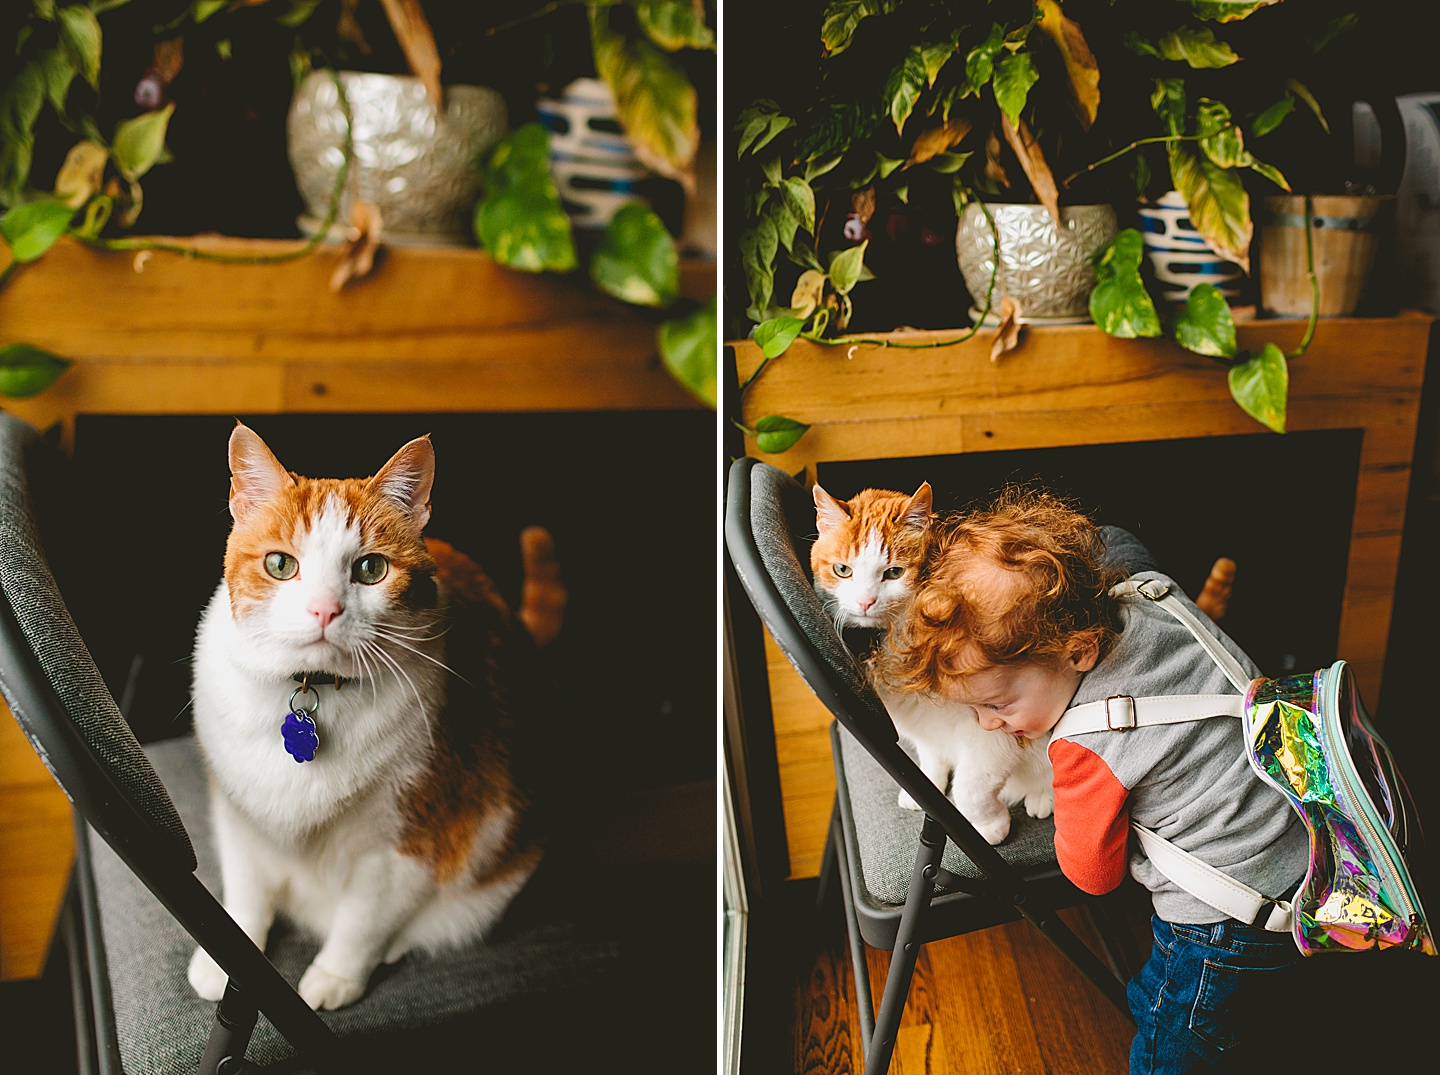 Toddler giving his cat a hug